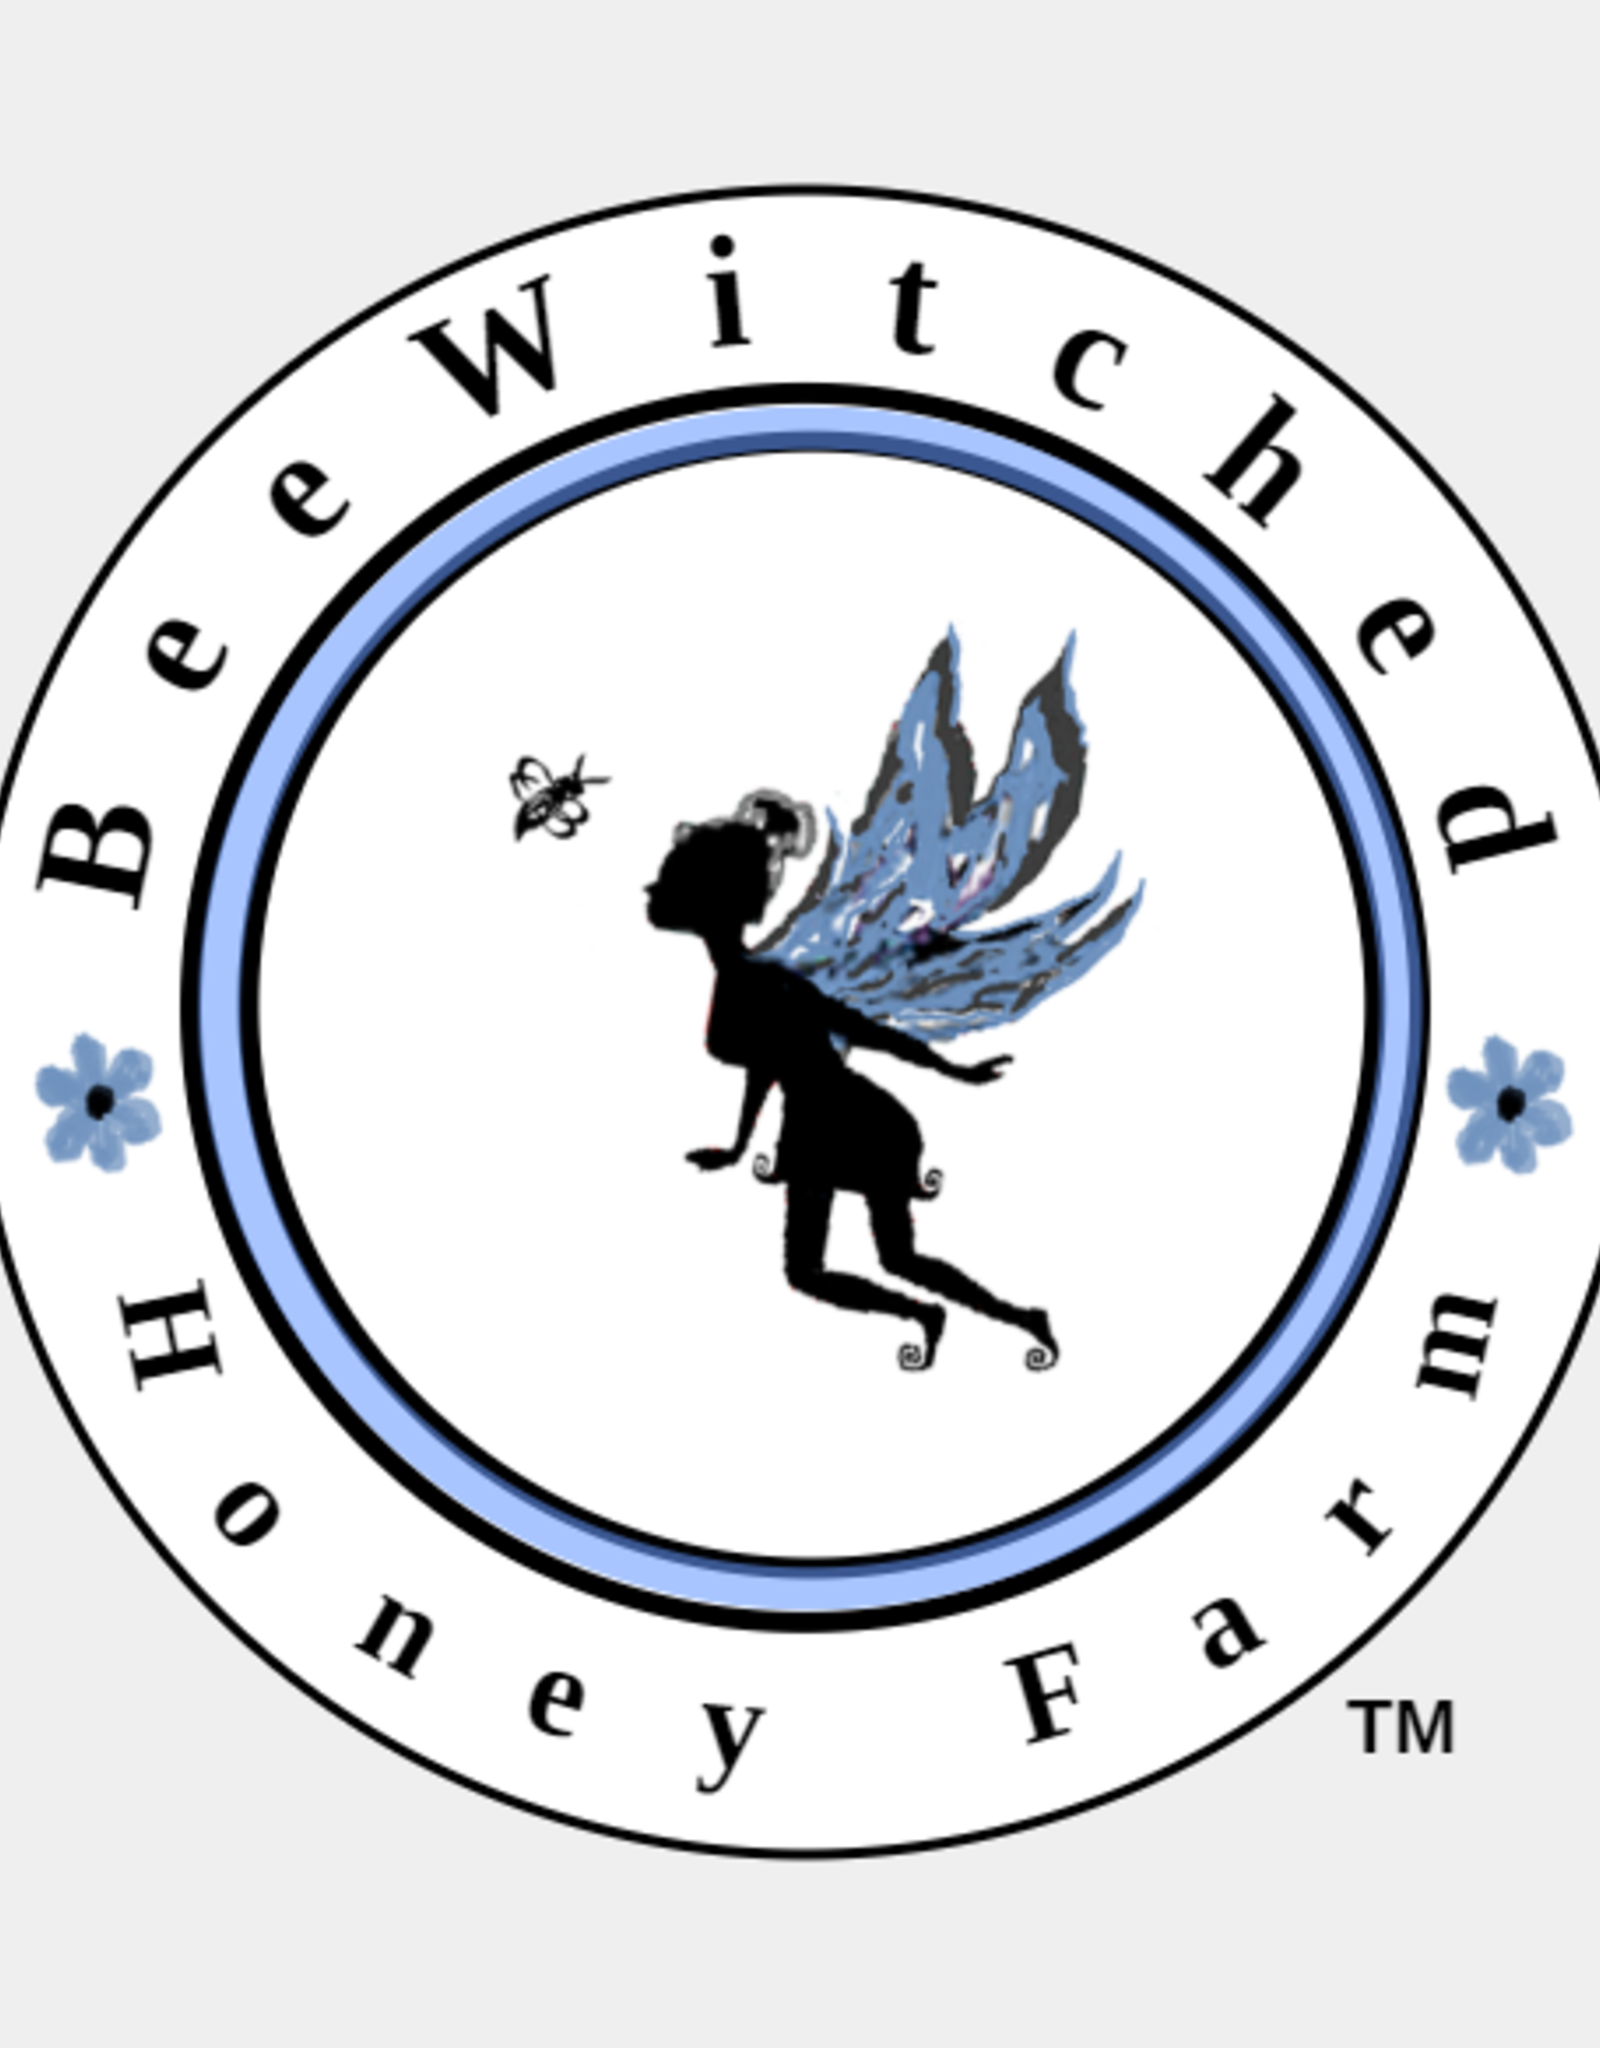 BeeWitched BeeWitched Raw Wildflower Honey